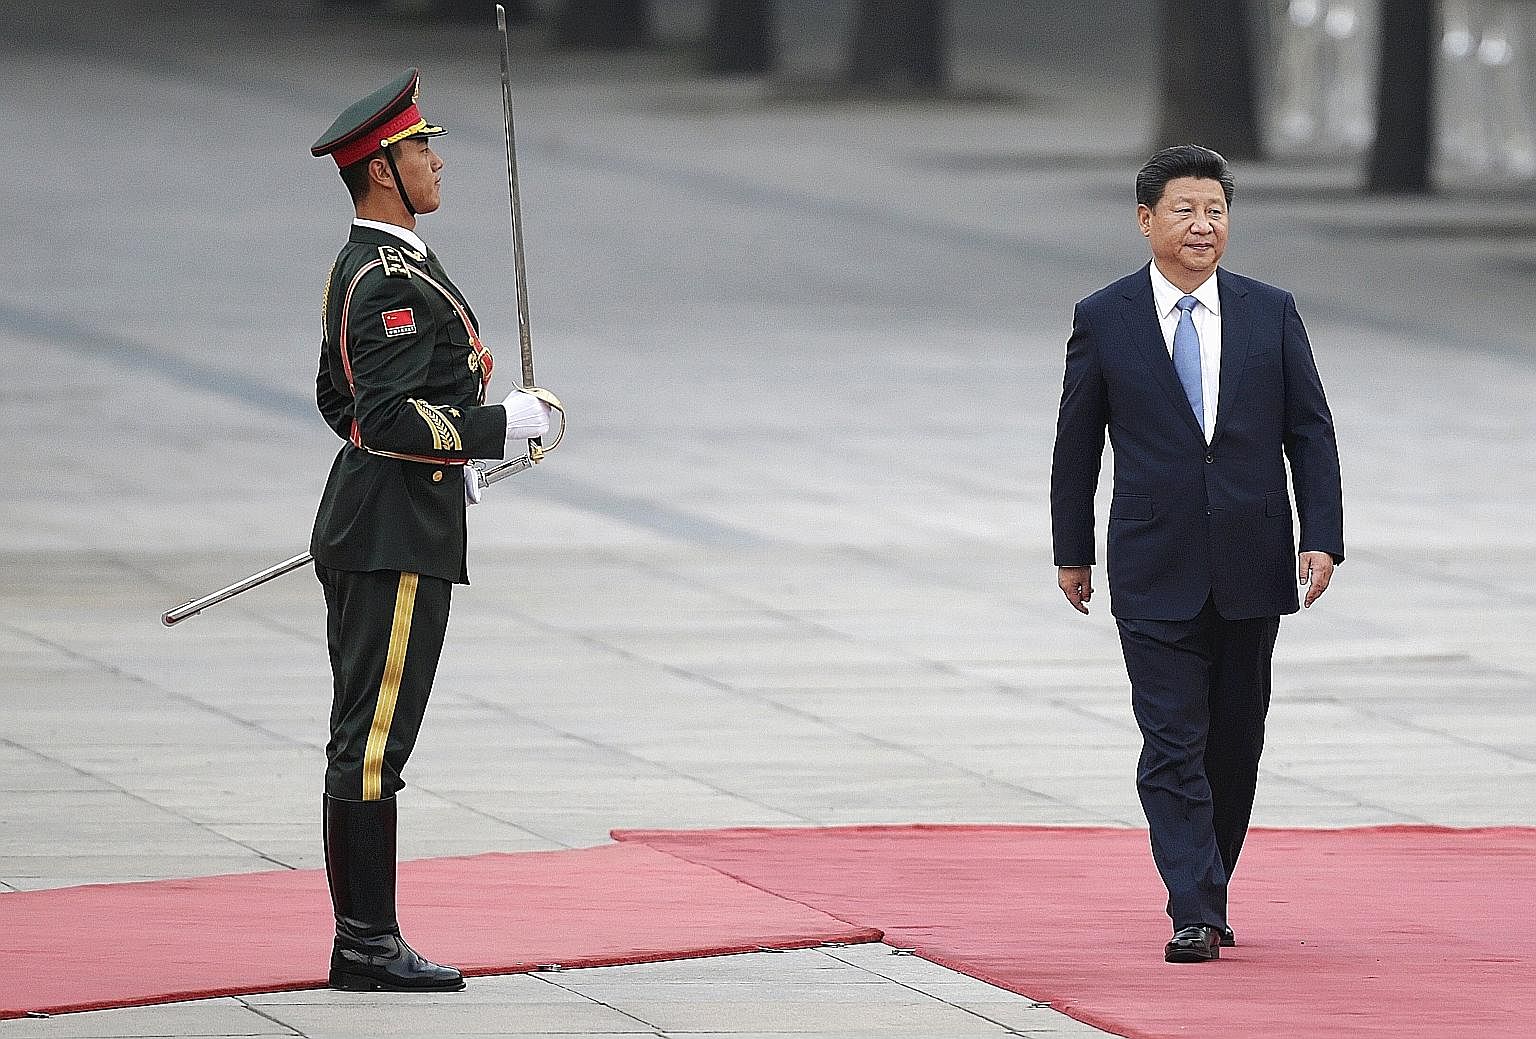 Mr Xi's top reform priority from the start was not economics but politics. It was first and foremost to strengthen the Chinese Communist Party. As far as he is concerned, unless you get the politics right, meaningful economic reforms will be very dif